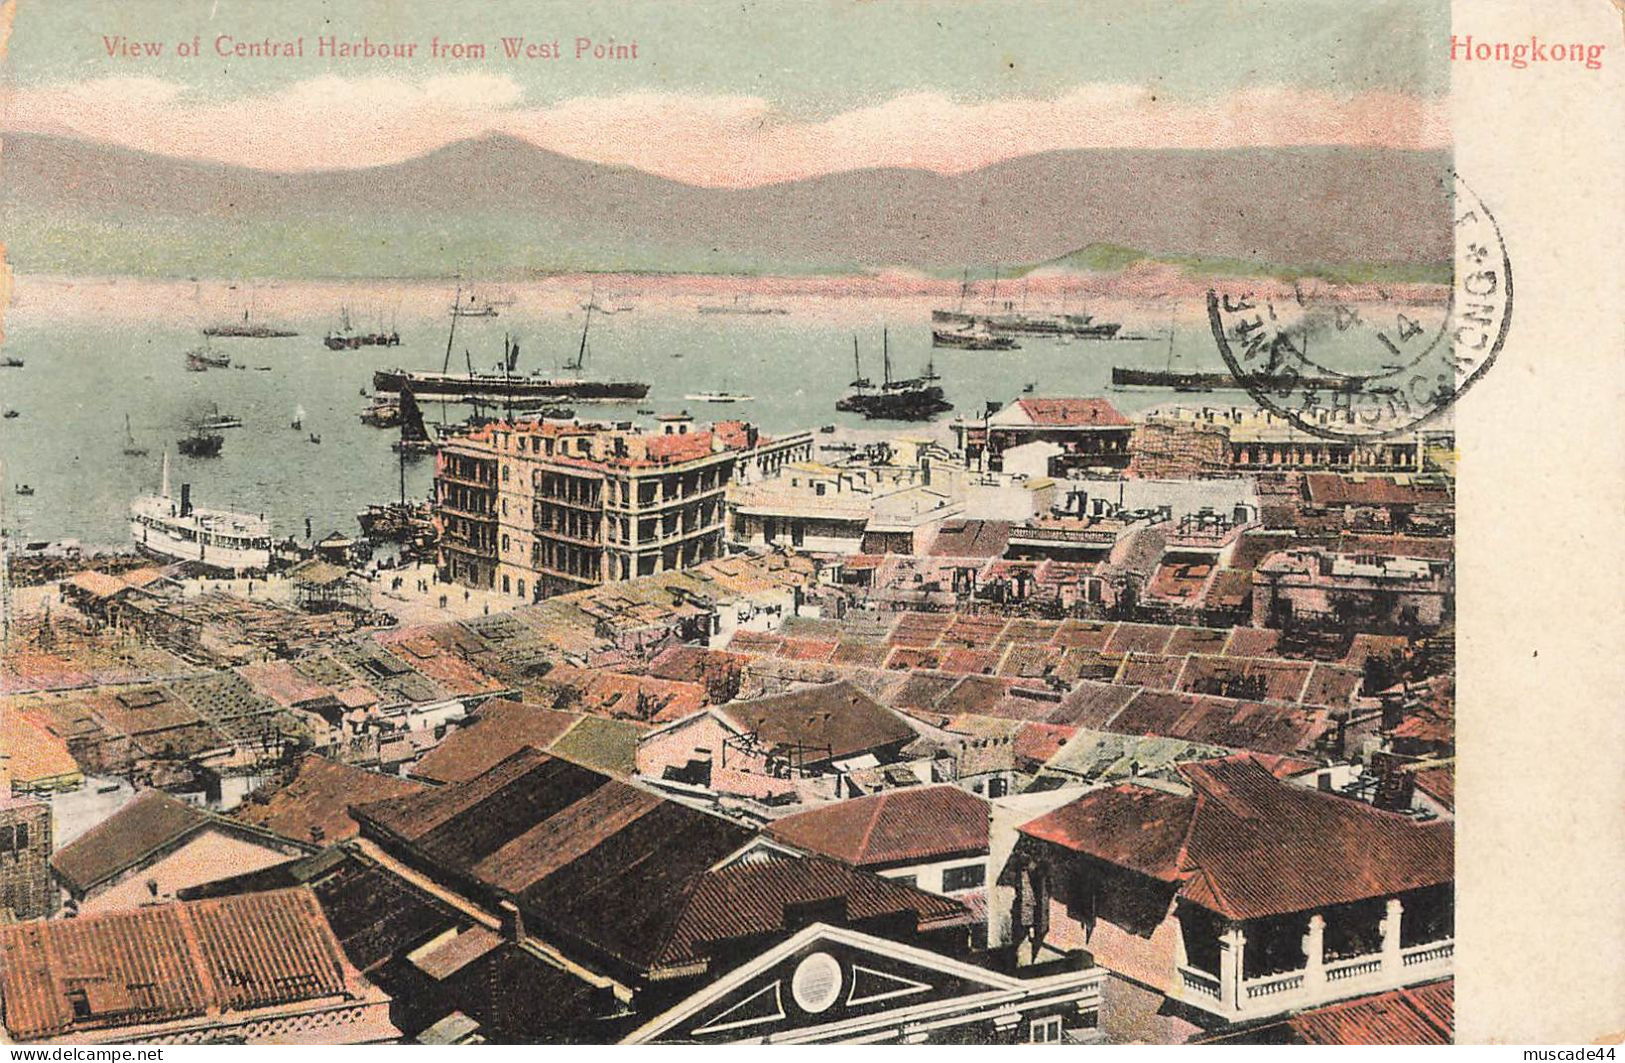 HONGKONG - VIEW OF CENTRAL HARBOUR FROM WEST POINT - Chine (Hong Kong)